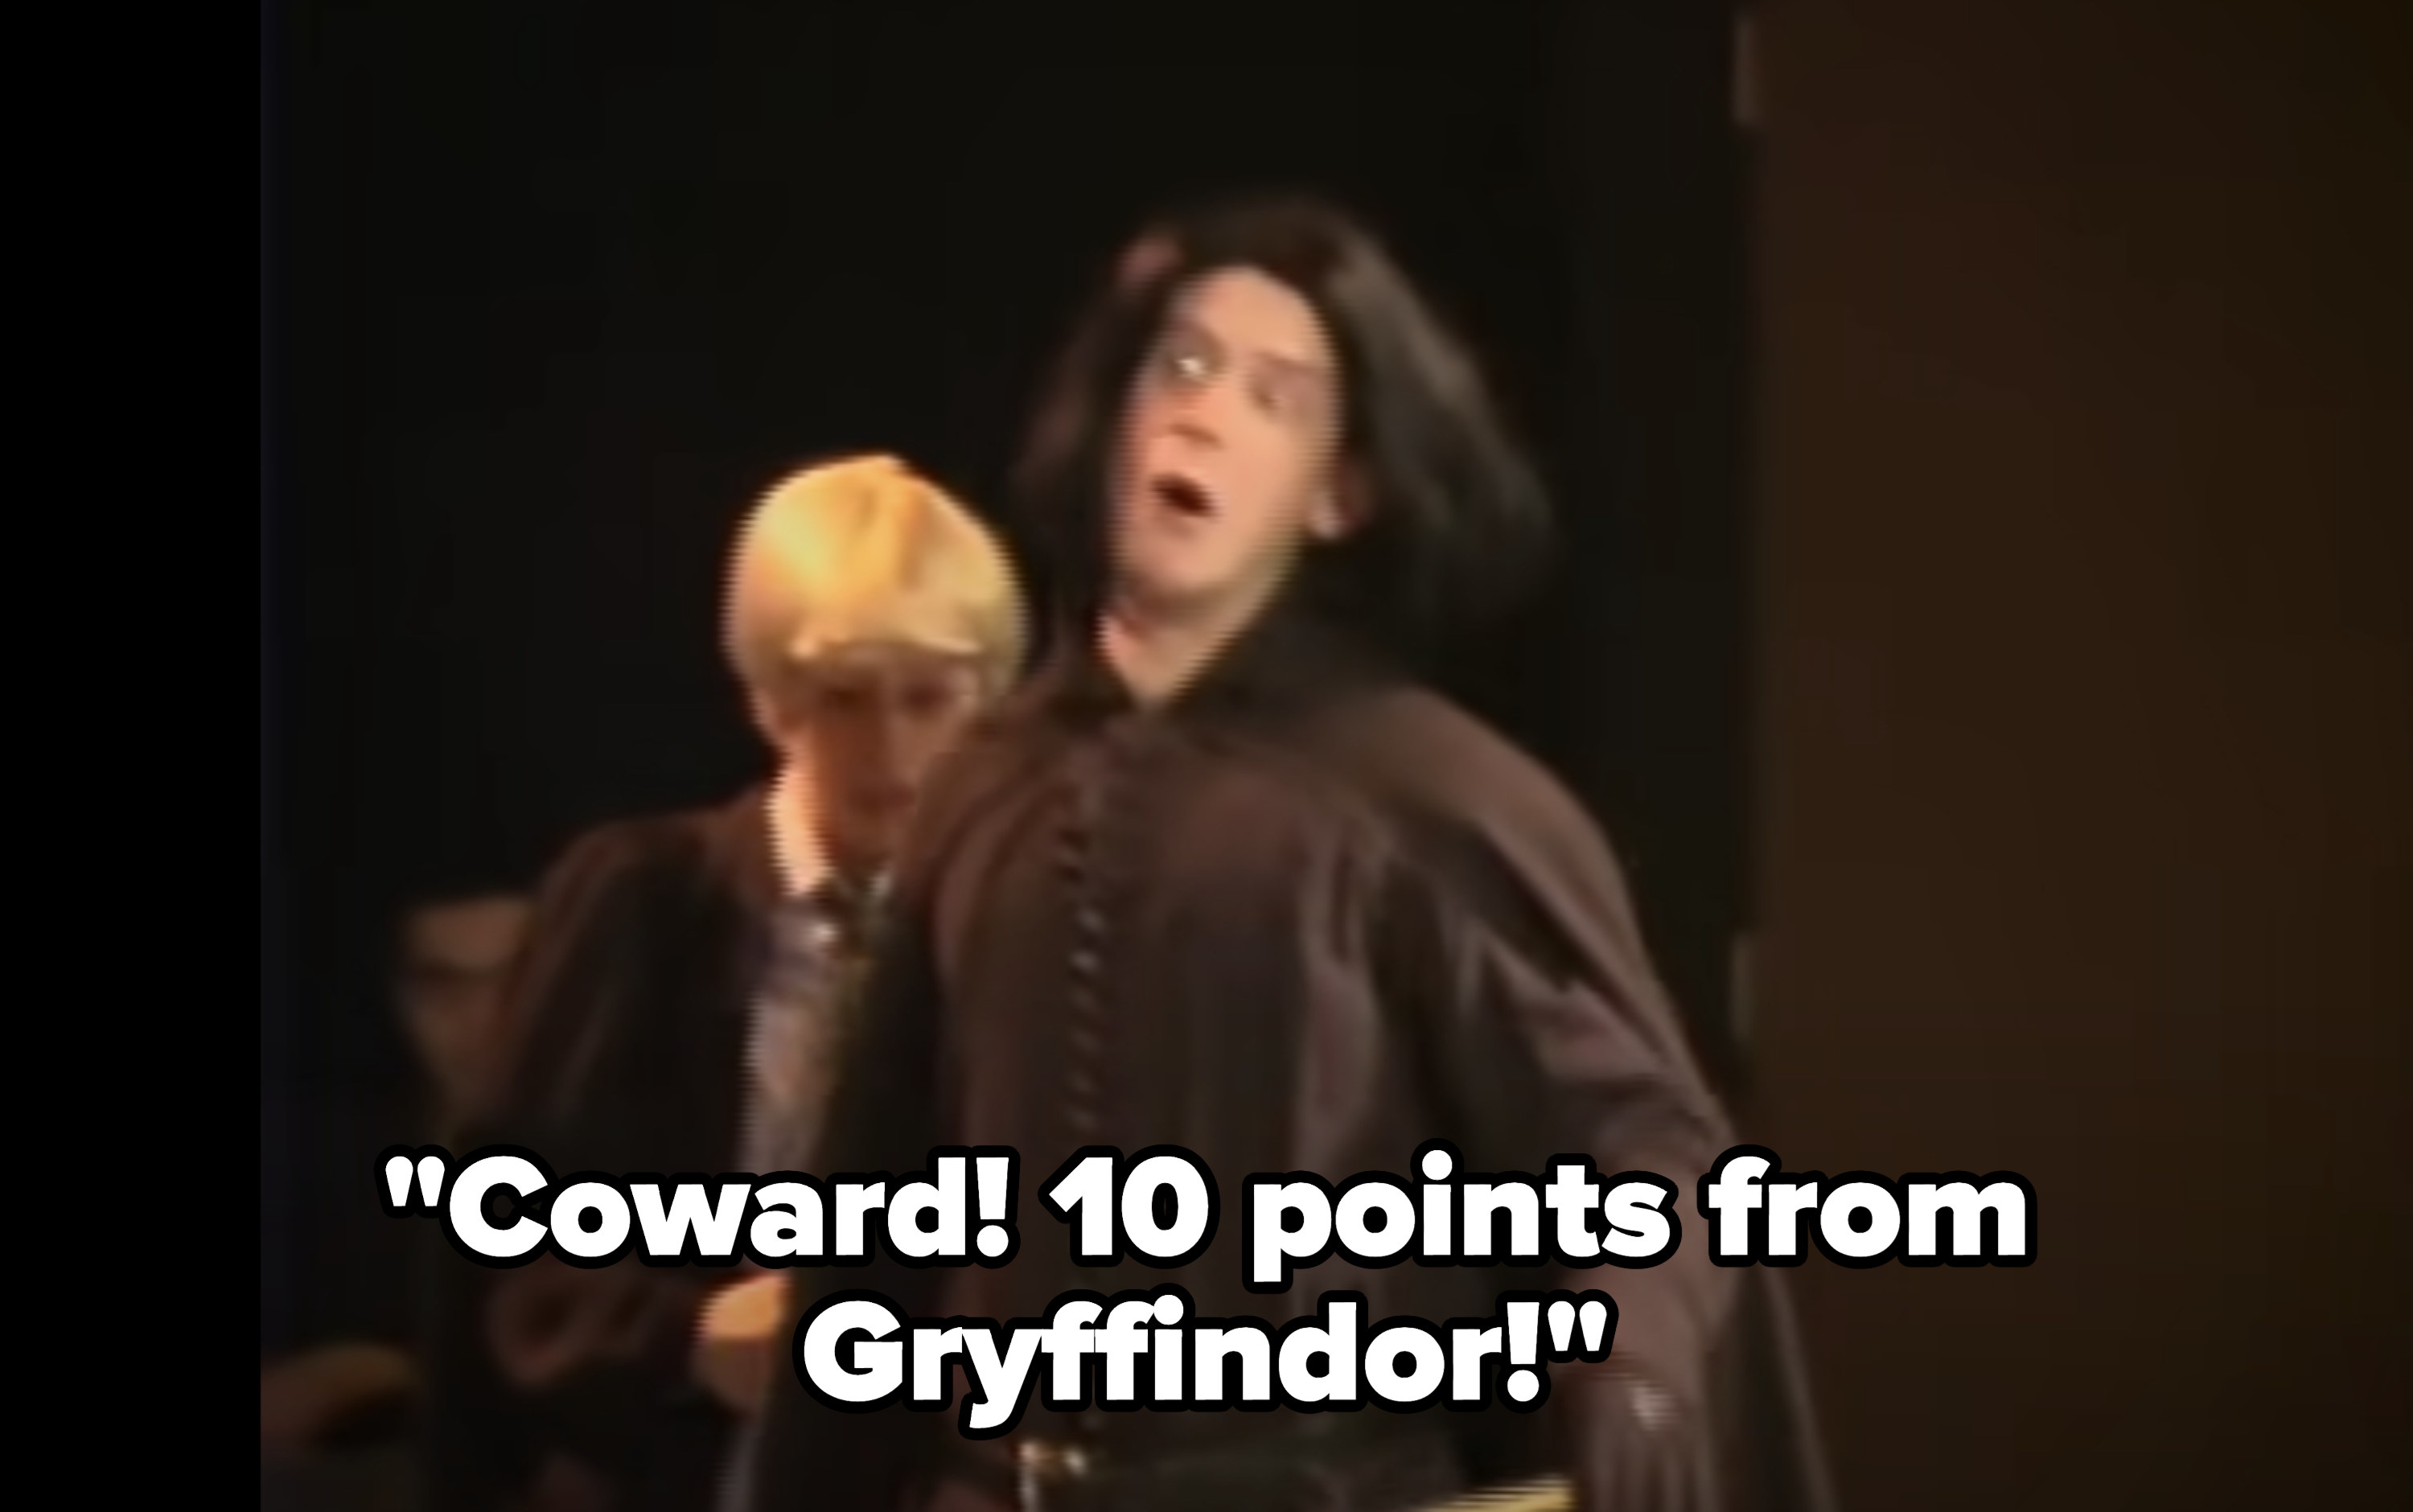 Snape: &quot;Coward! 10 points from Gryffindor!&quot;